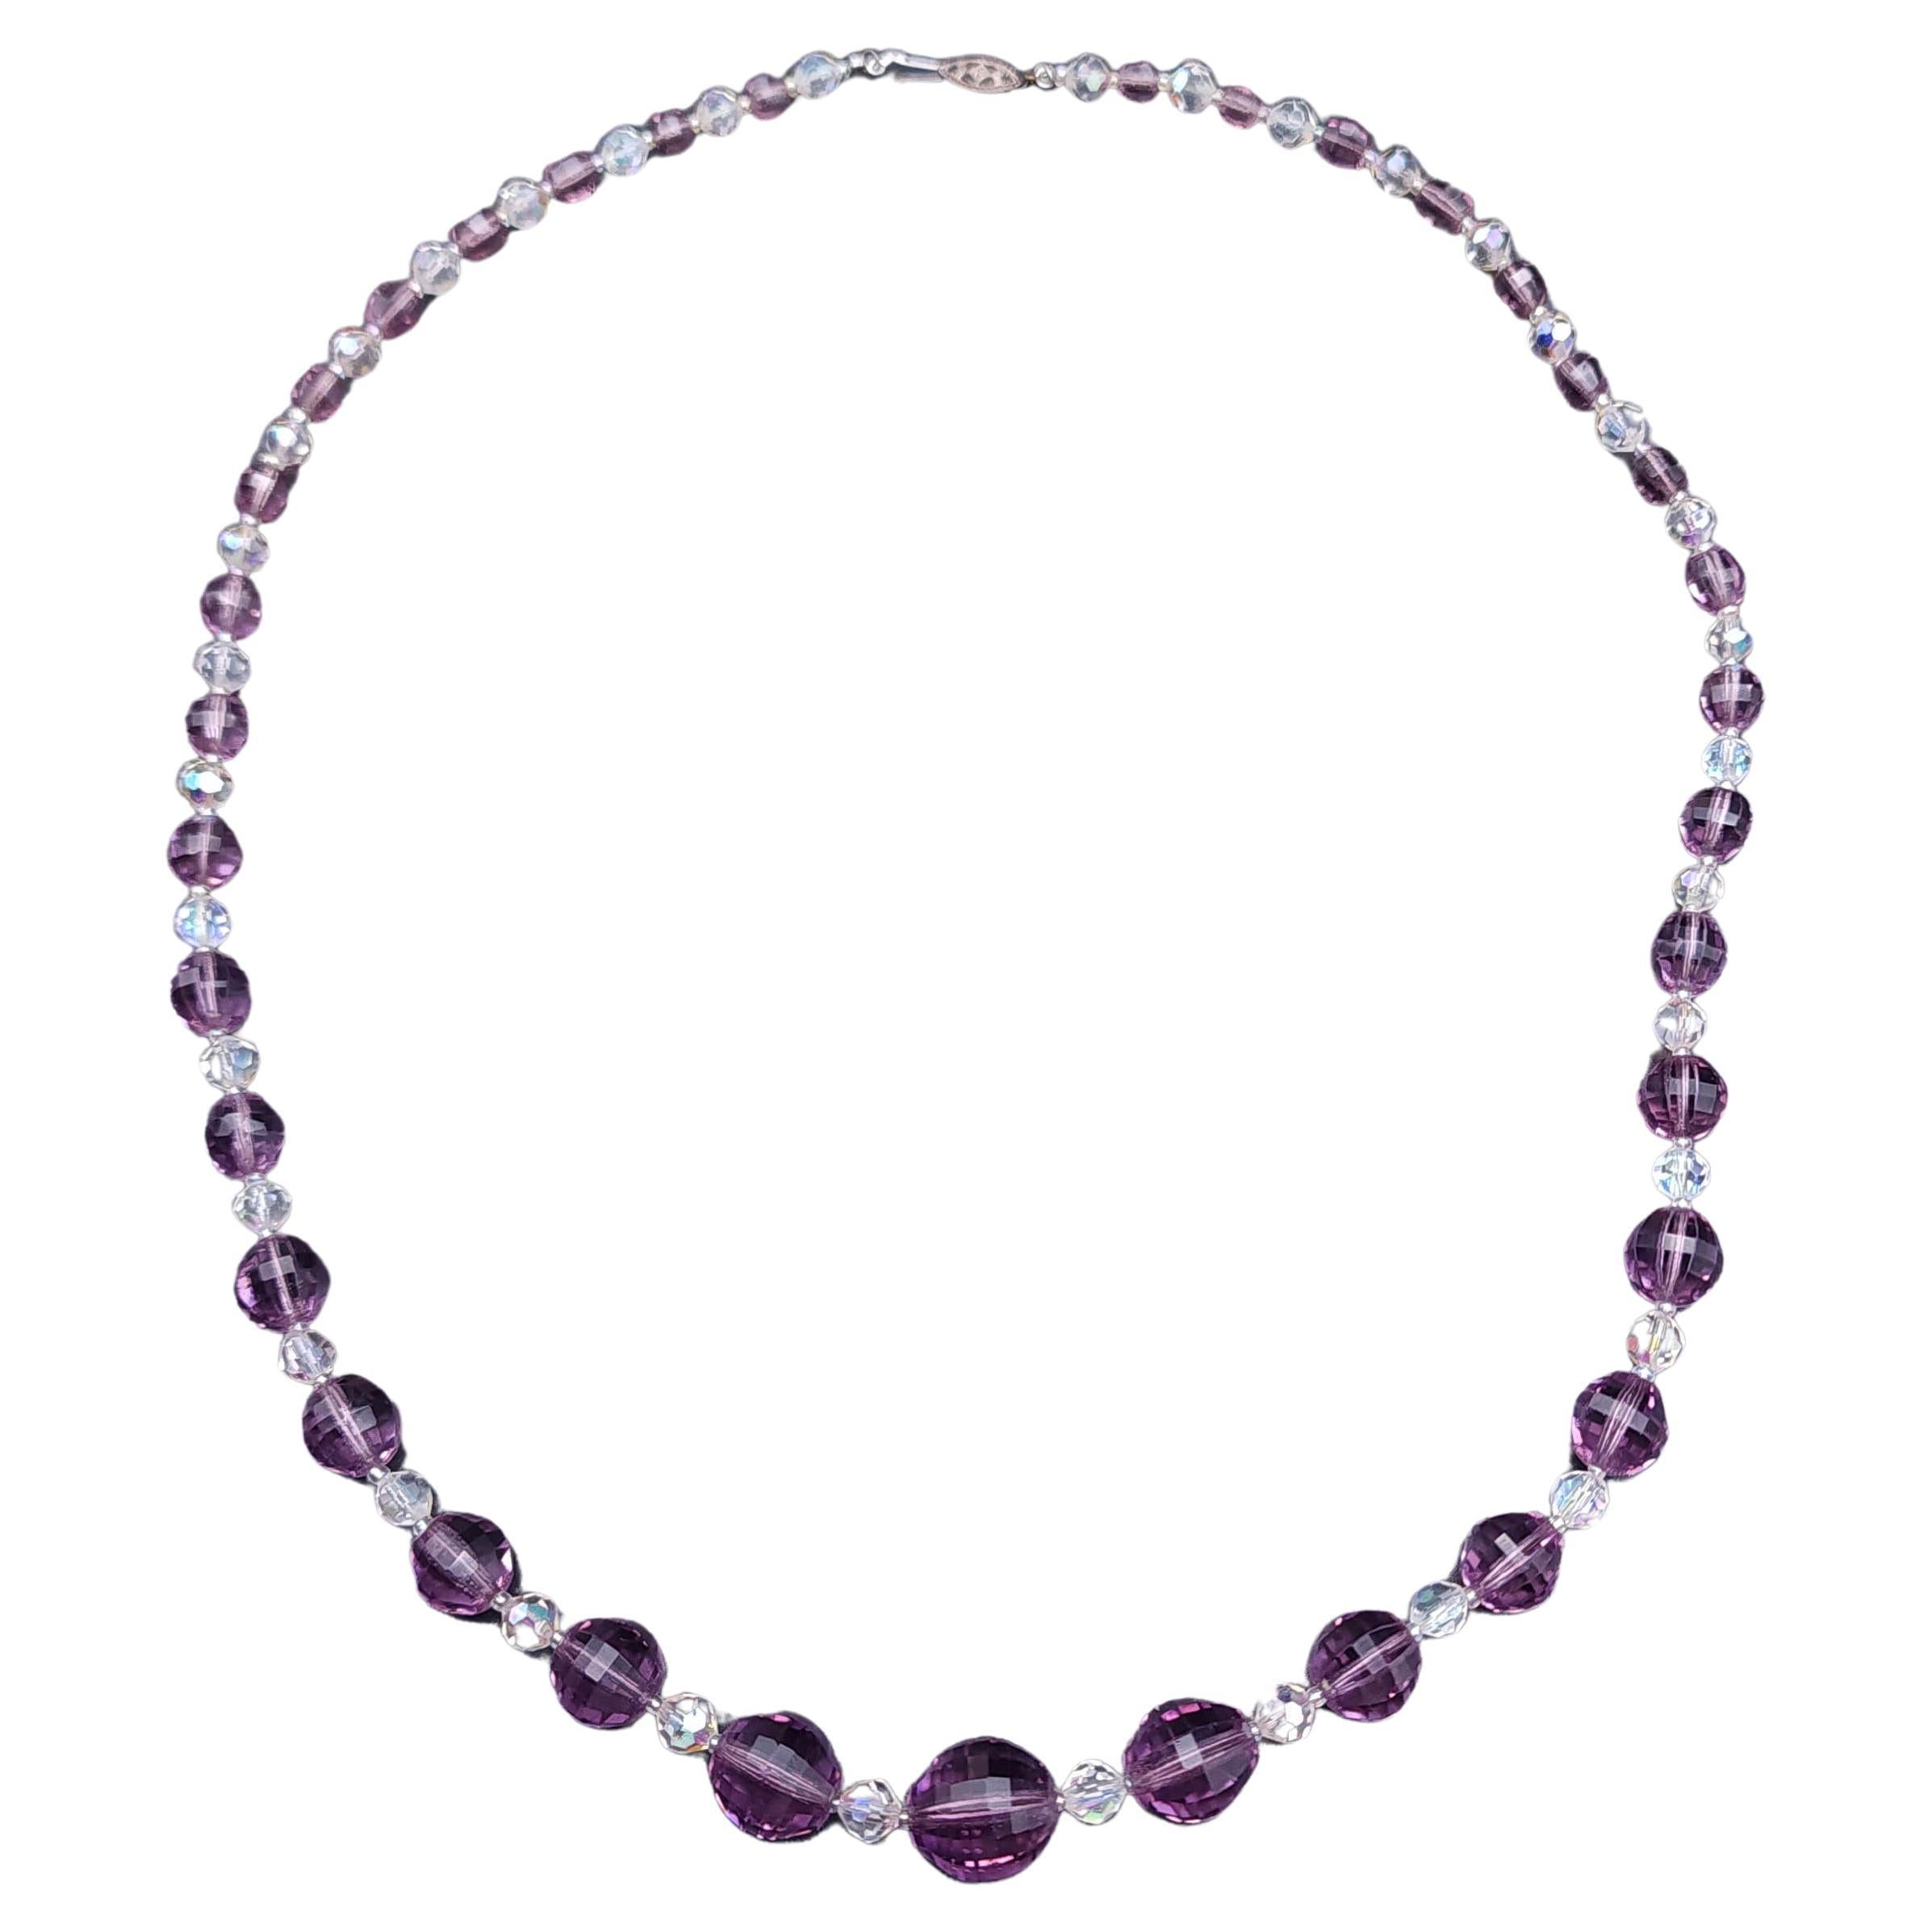 Vintage Rock Crystal Graduated Bead Necklace, Amethyst & Clear, Sterling Silver